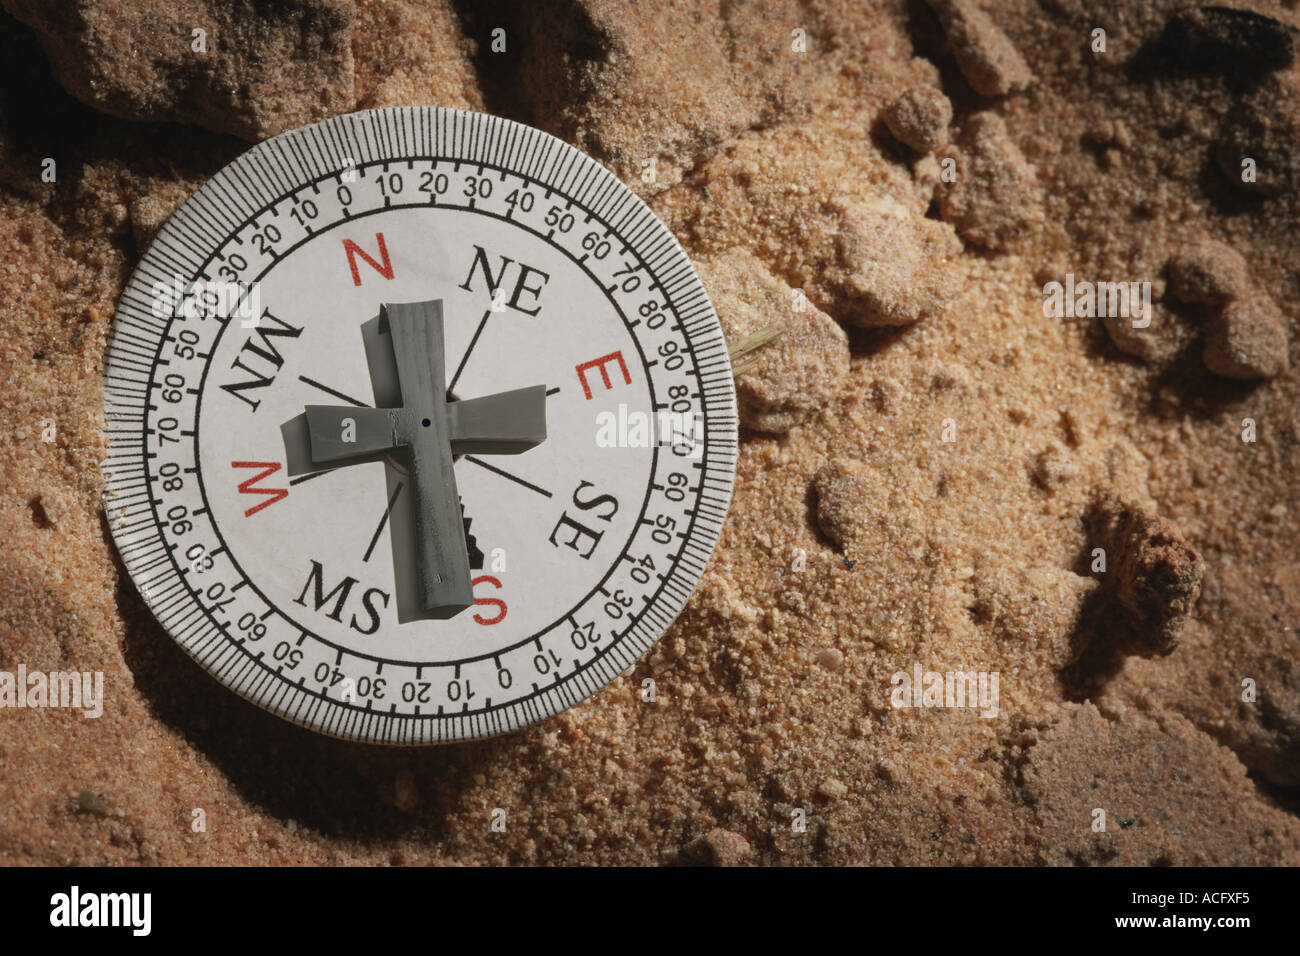 Compass with a cross as a pointer Stock Photo - Alamy